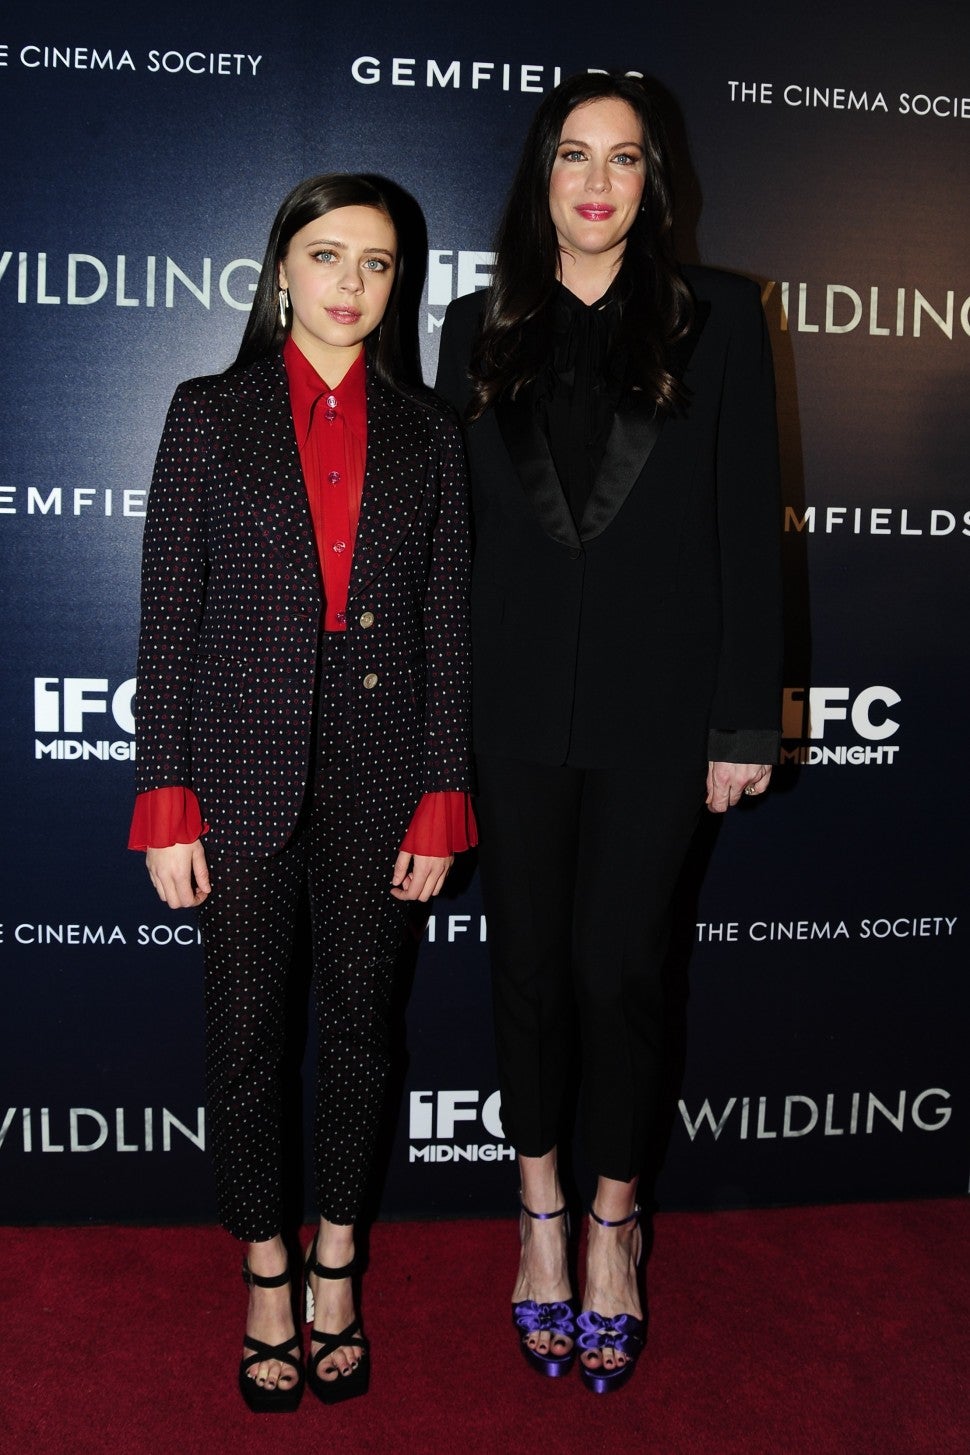 Liv Tyler and Bel Powley at Wilding premiere